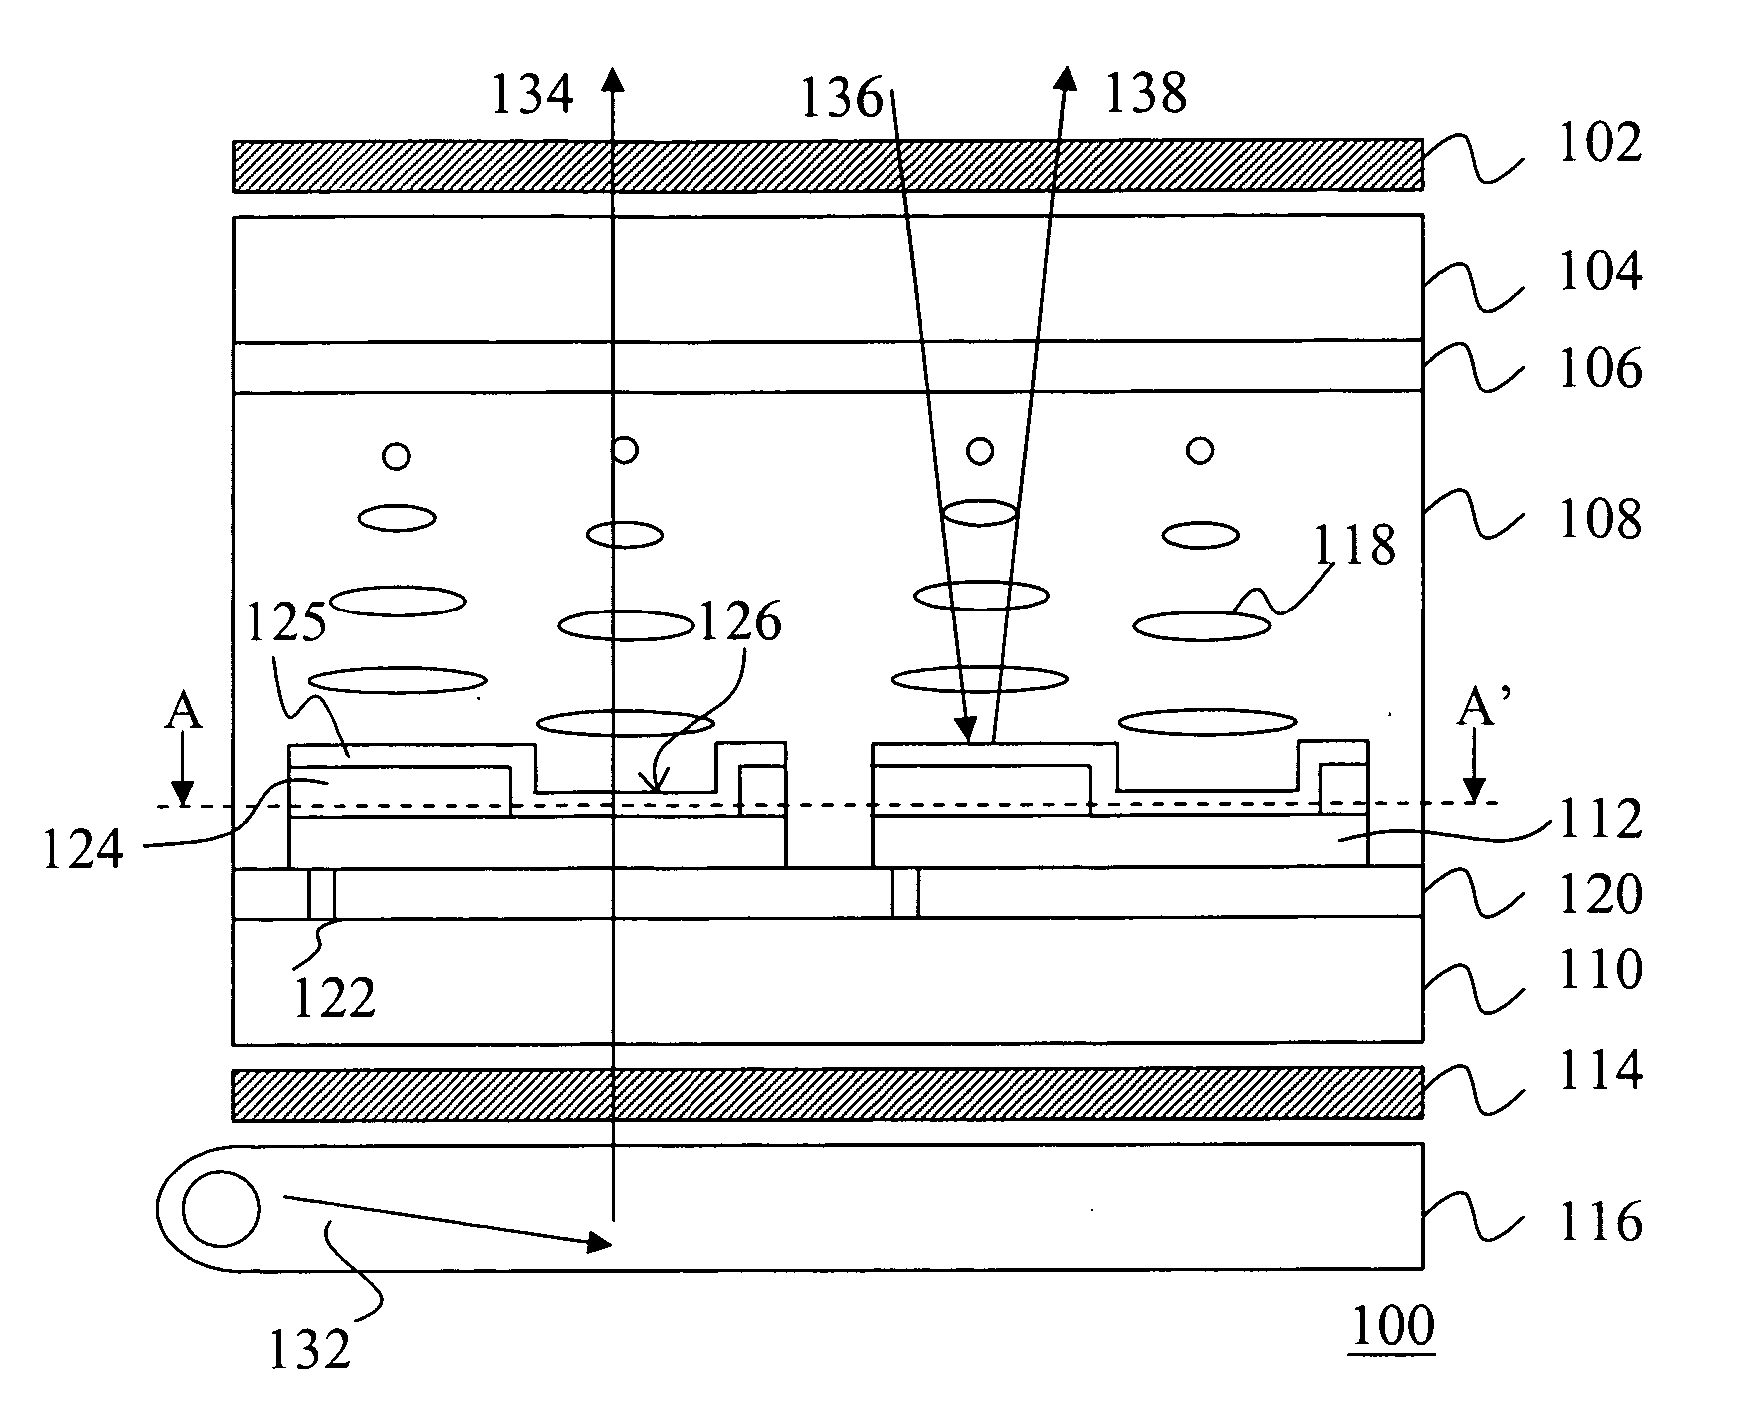 Display panel having a reflective layer therein